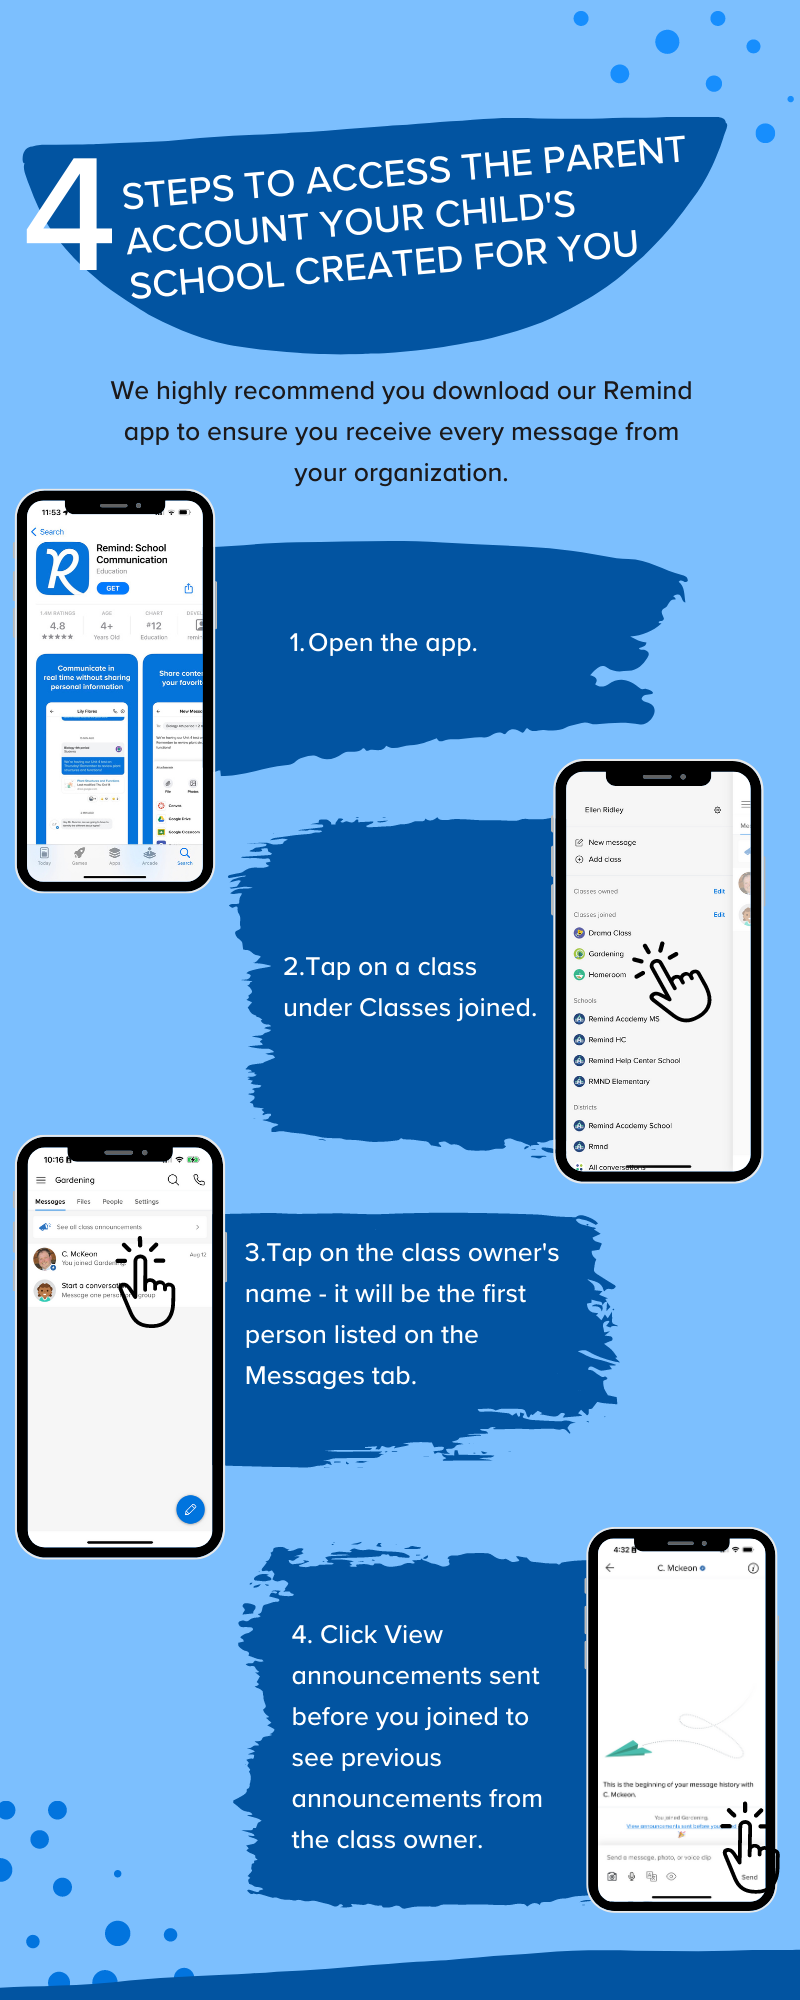 4 steps to access the parent account your child's school created for you. We highly recommend you download our Remind app to ensure you receive every message from your organization. 1. Open the app. 2. Tap on a class under Classes joined. 3. Tap on the class owner’s name - it will be the first person listed on the Messages tab. 4. Click View announcements sent before you joined to see previous announcements from the class owner.